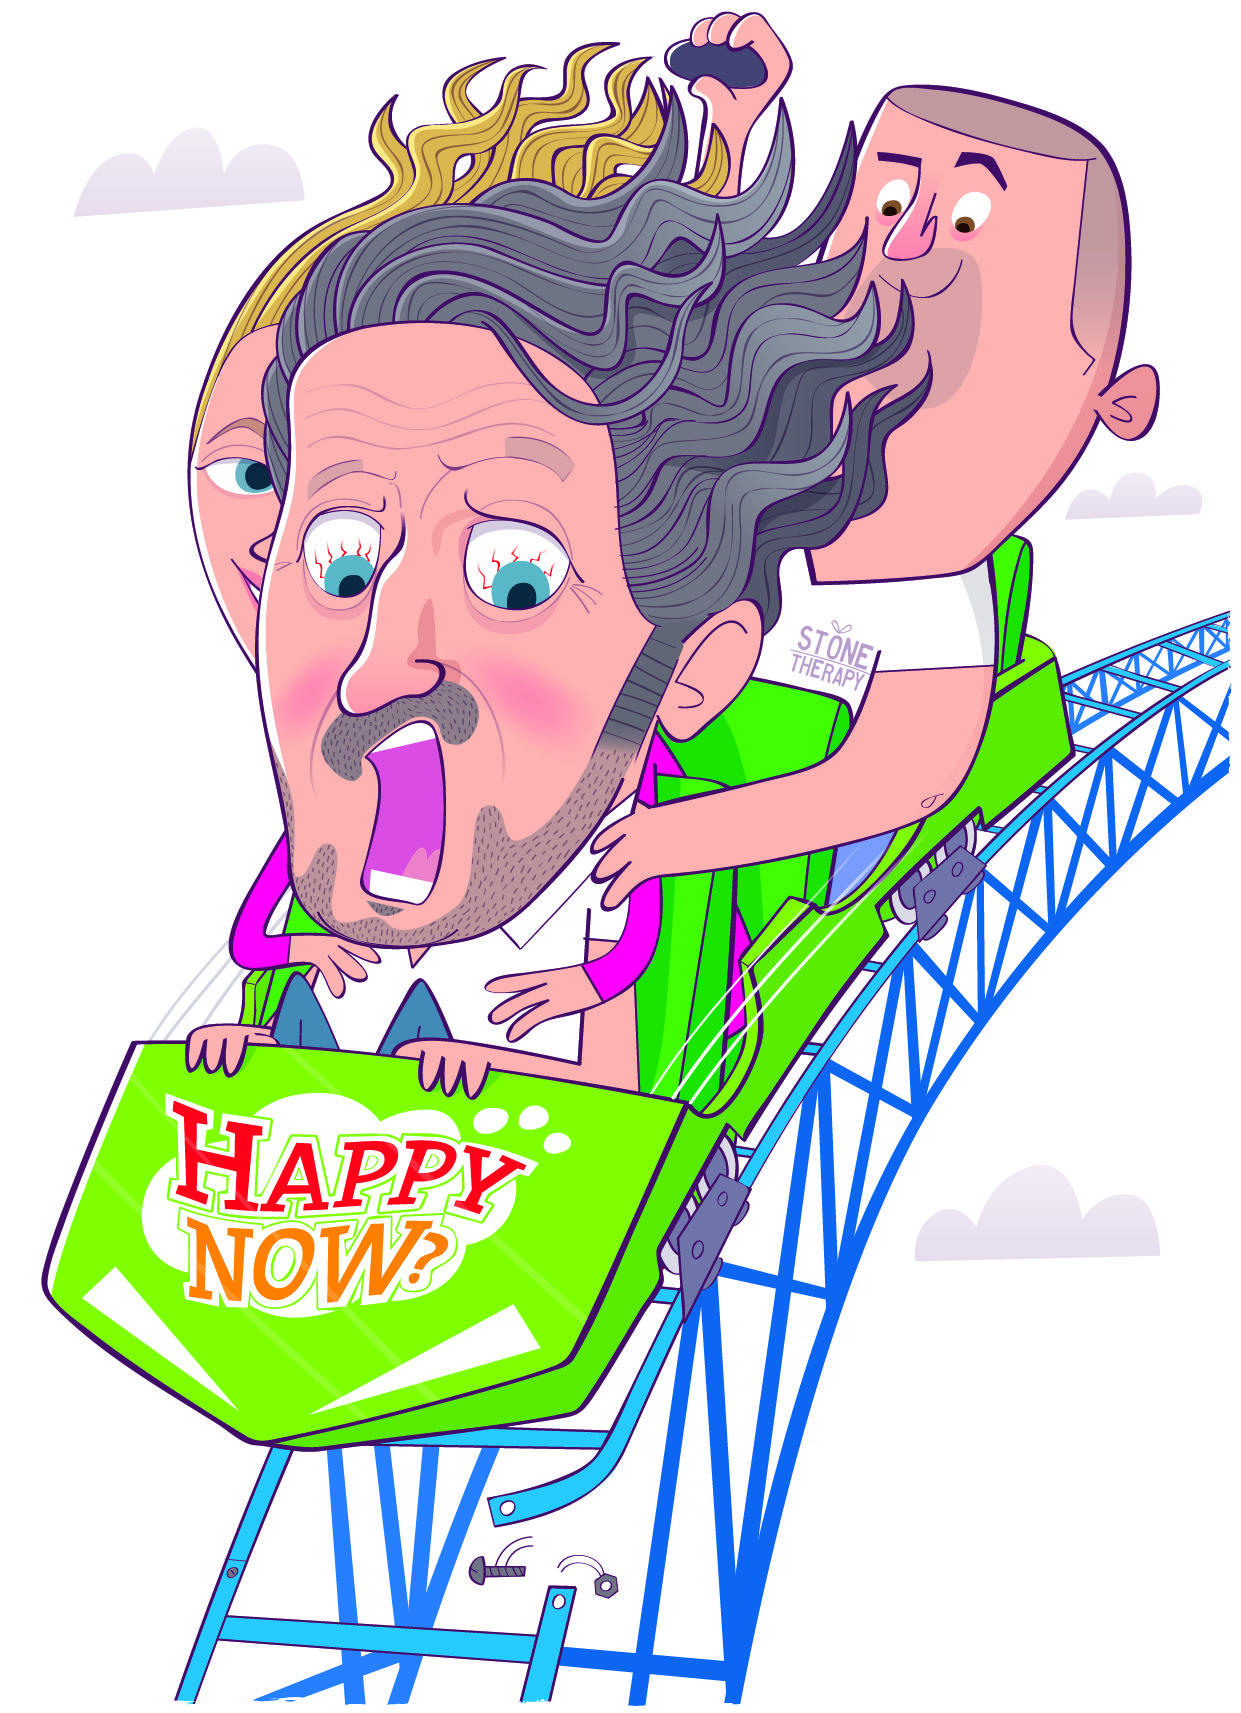 Richard Herring: Why I can never be happy